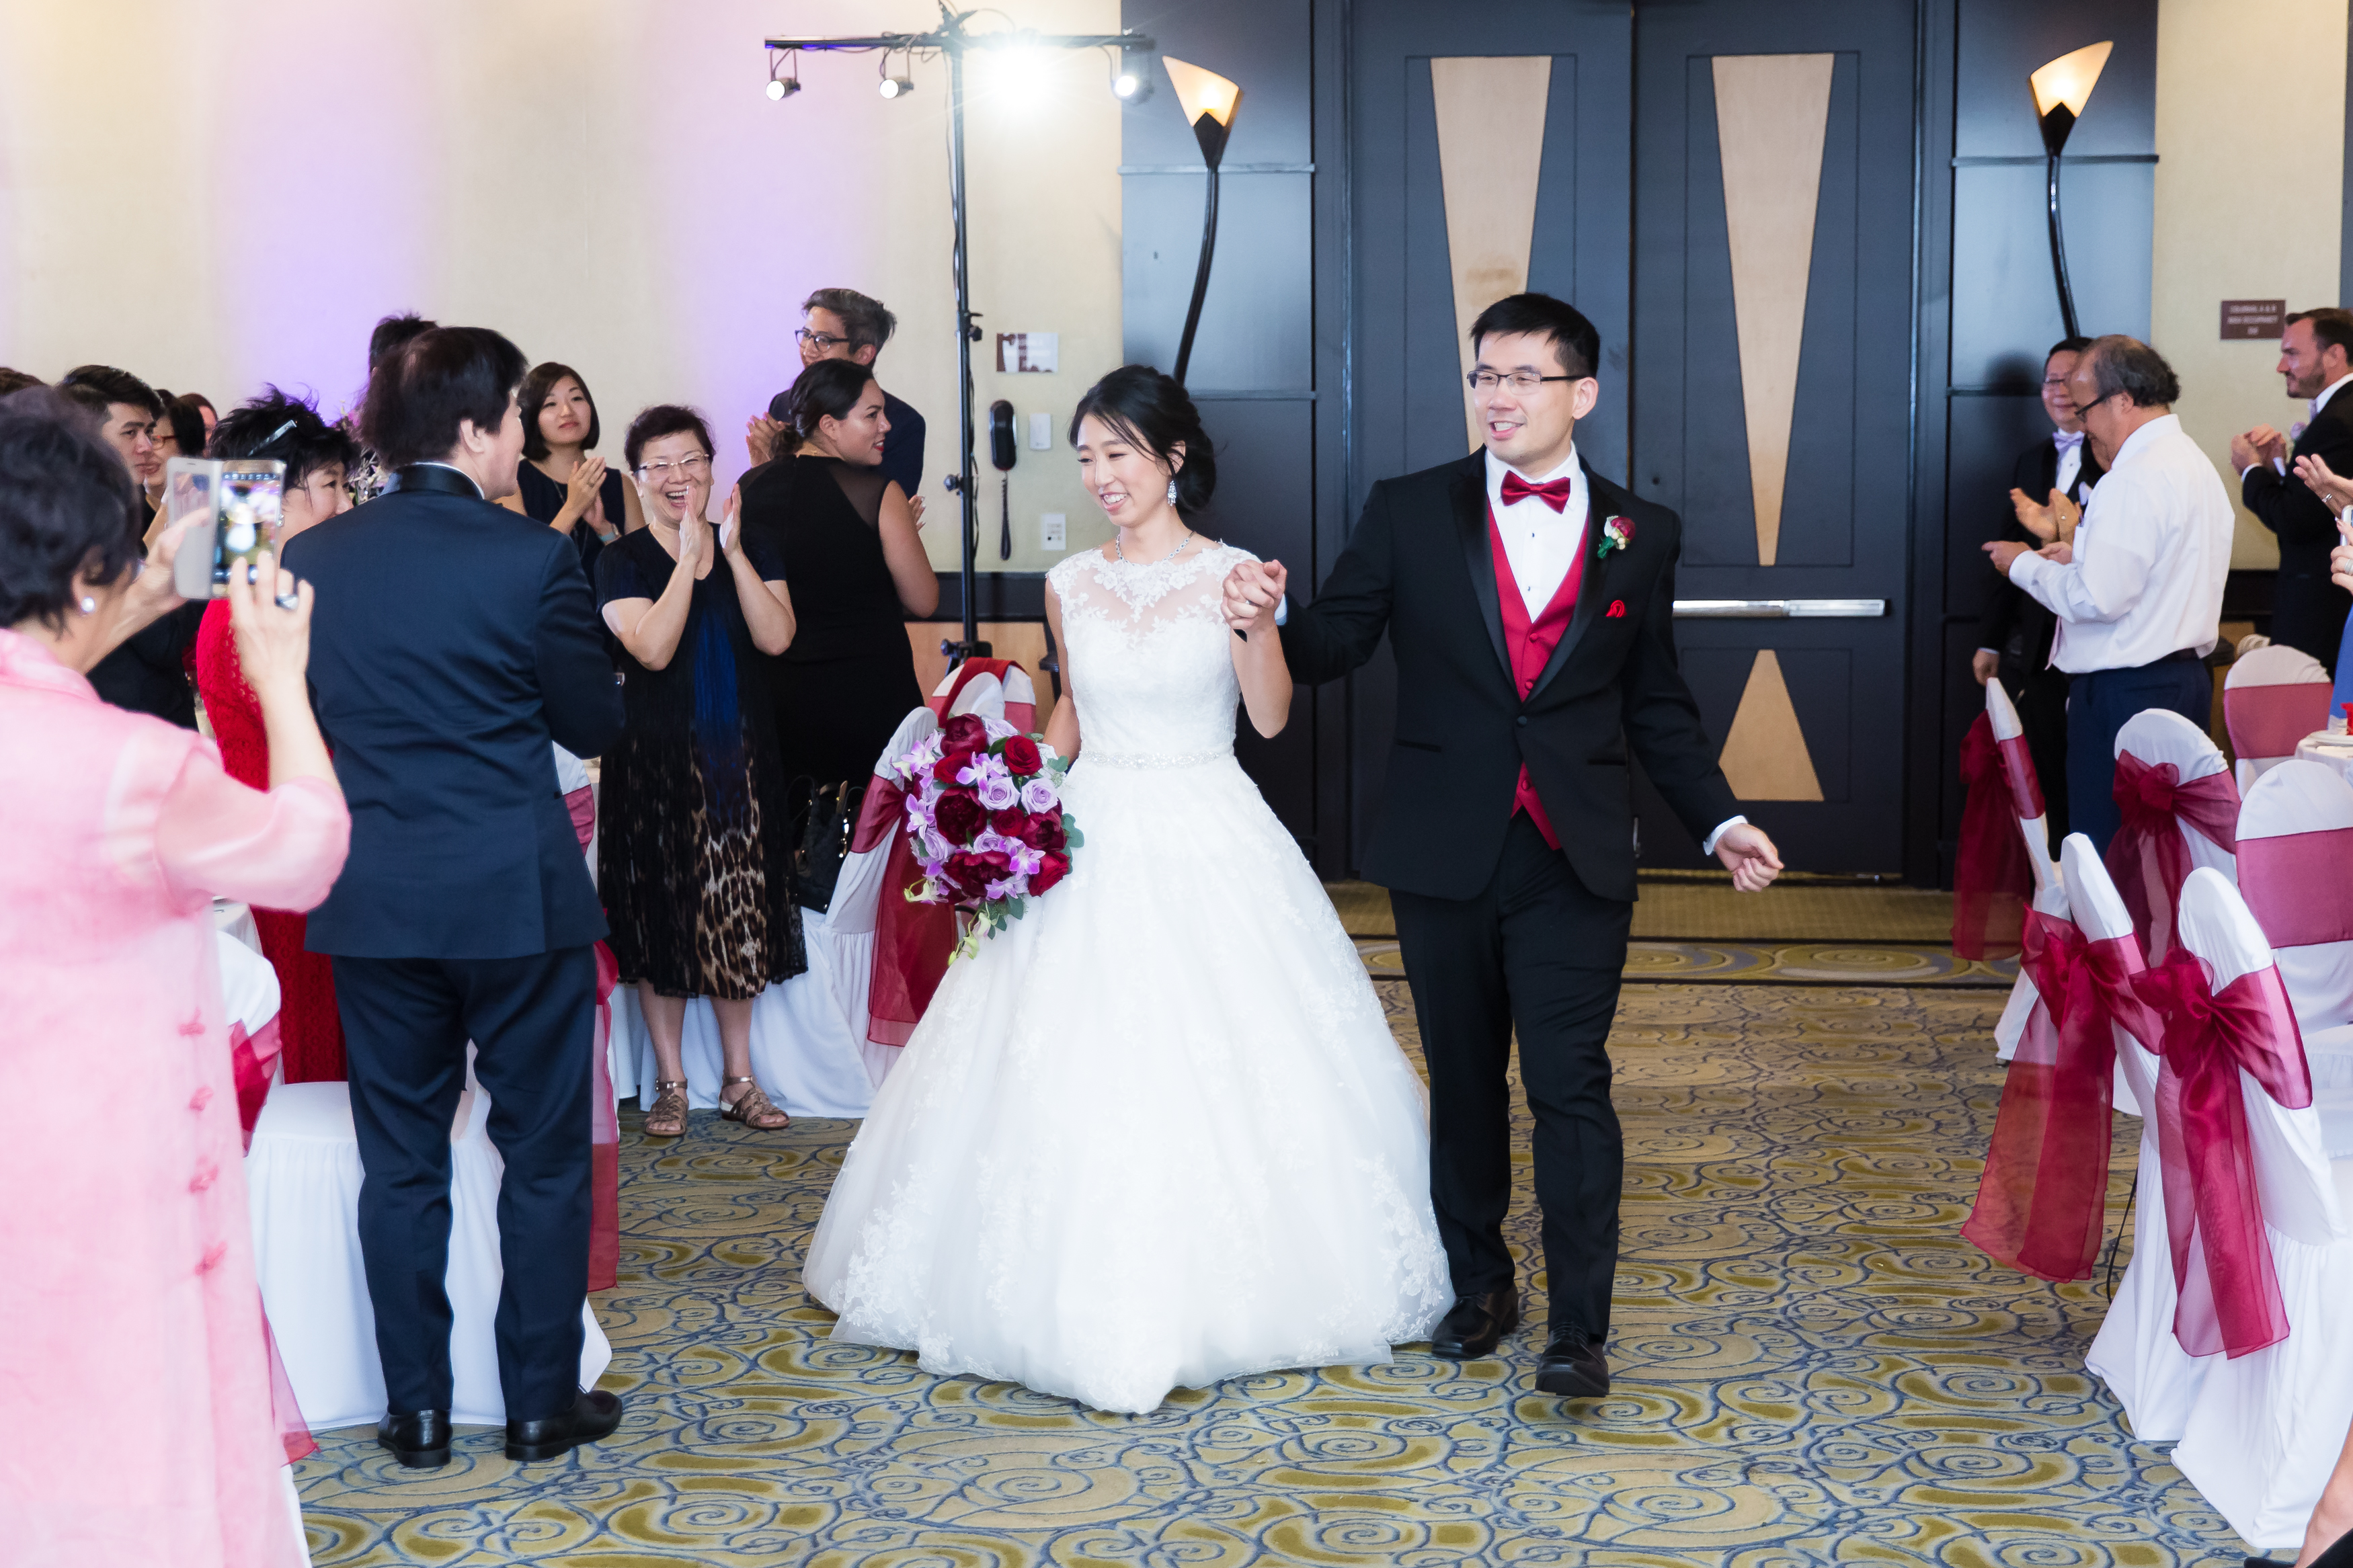 Bride and groom entering reception for grand entrance